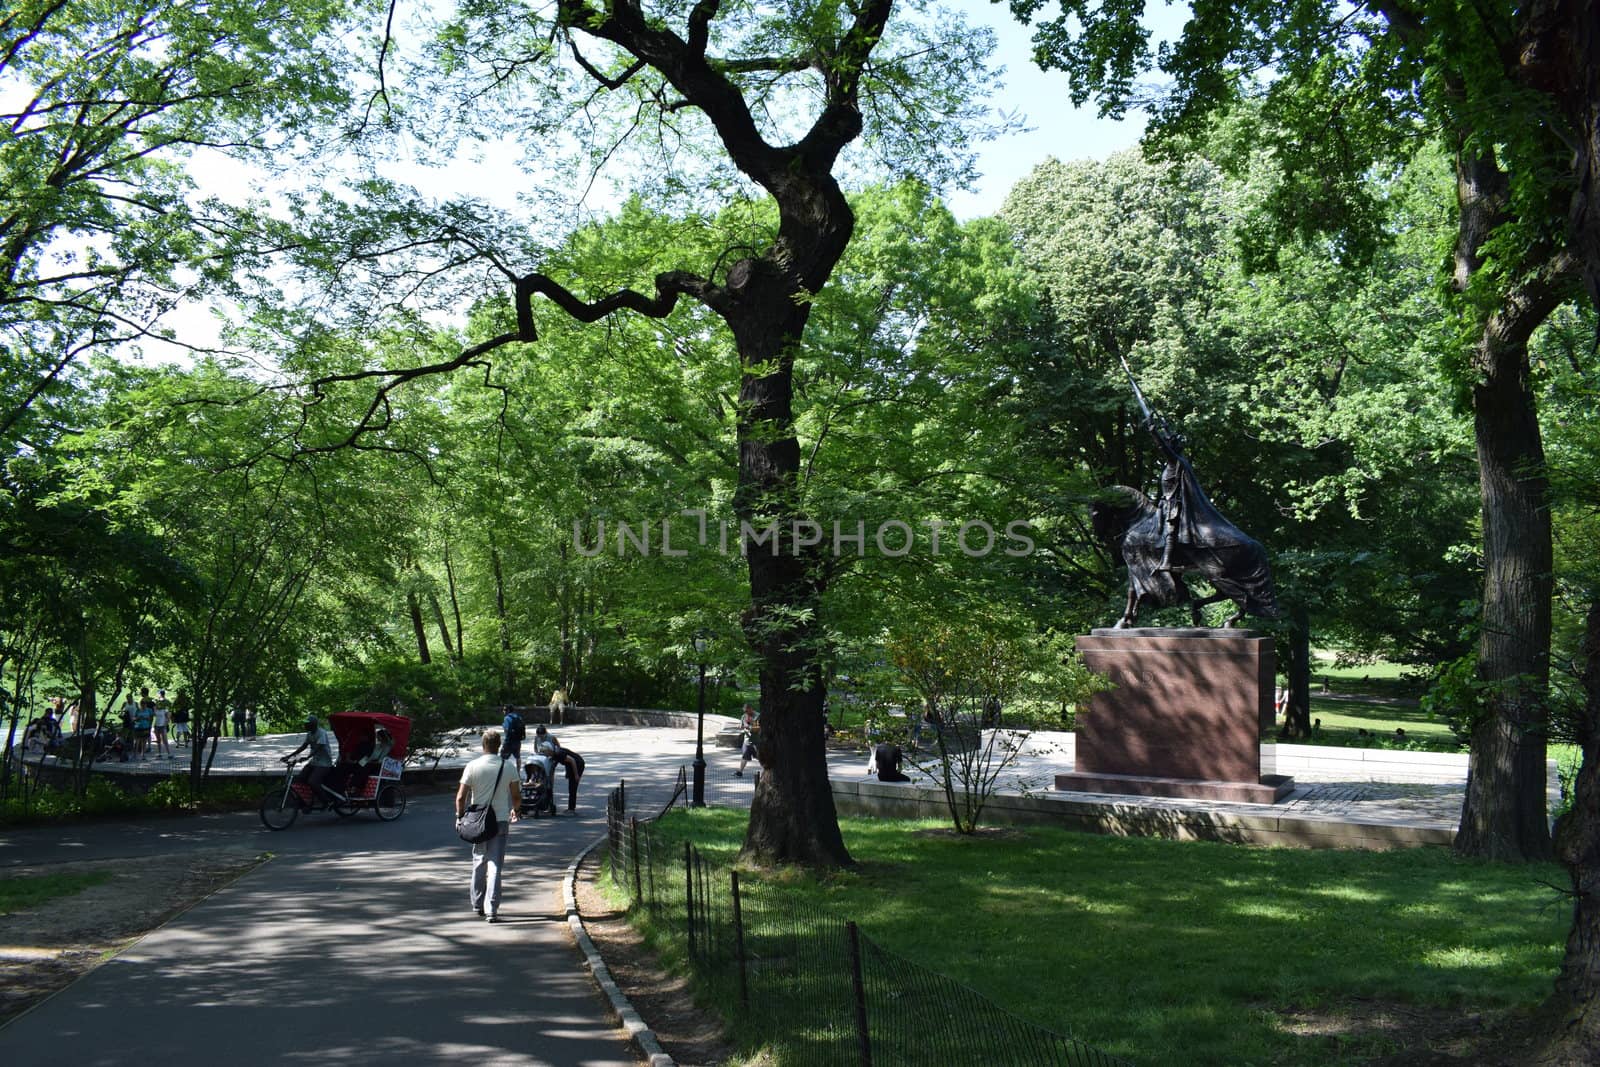 New York, United States of America - June 17, 2020: The beautiful central park in New York in a sunny summer day by matteobartolini